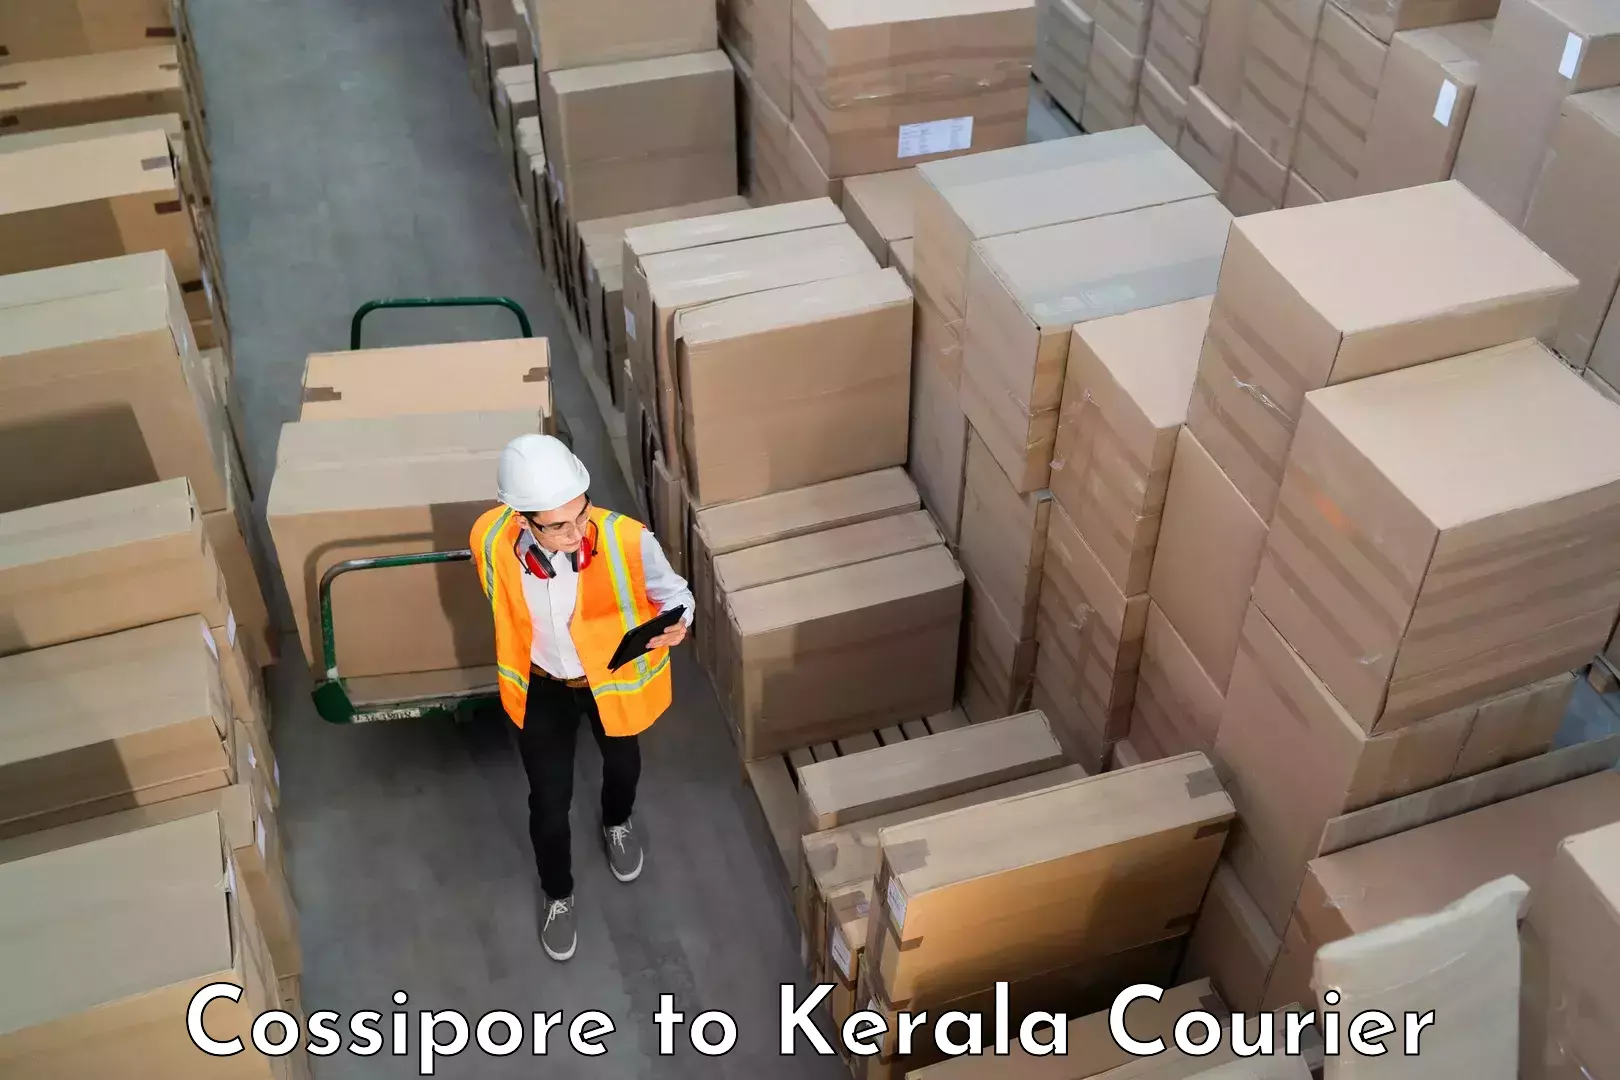 Luggage shipment tracking Cossipore to Rajamudy